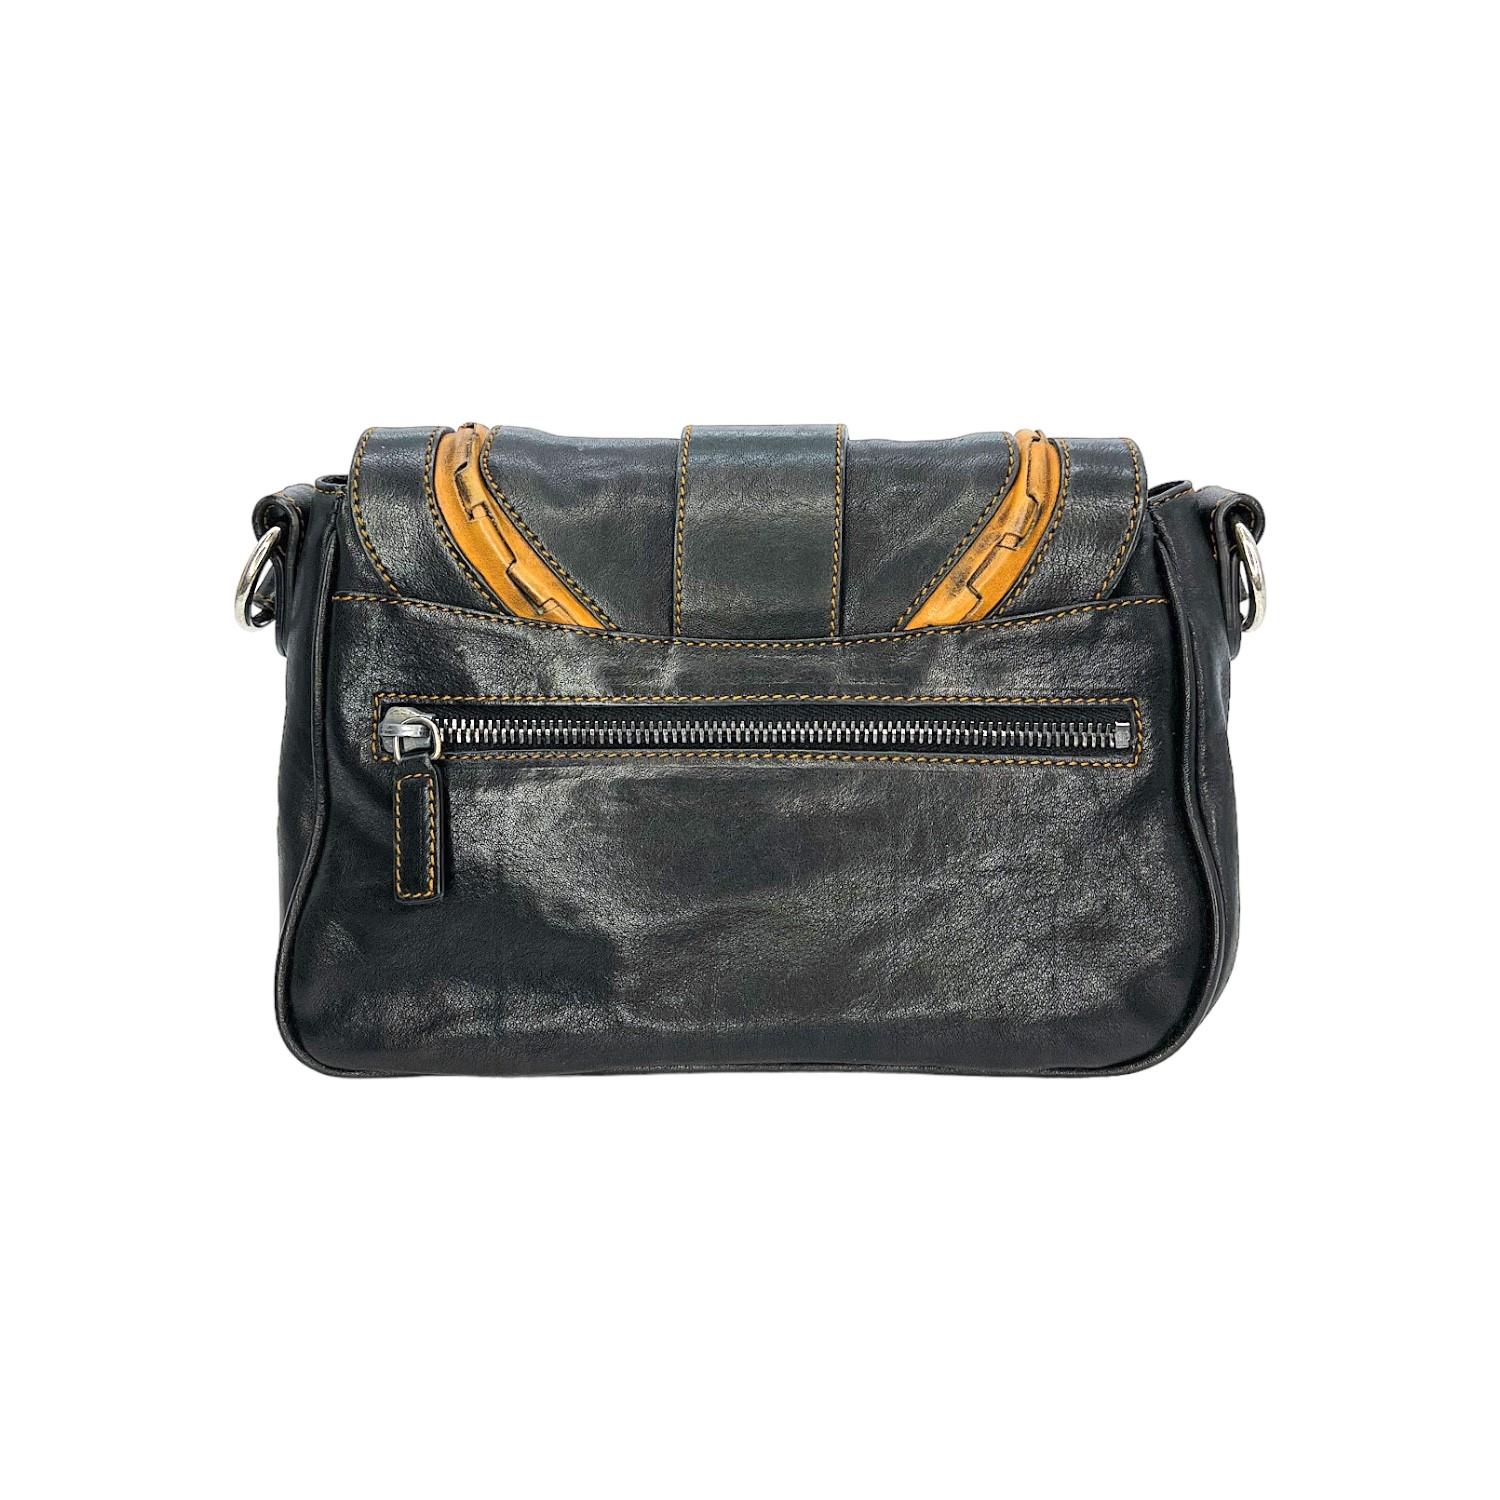 This Christian Dior Medium Gaucho Crossbody Saddle Bag was made in Italy and it is finely crafted of a calfskin leather exterior with silver-tone hardware features. It has an adjustable flat leather shoulder strap. It has a zipper pocket on the